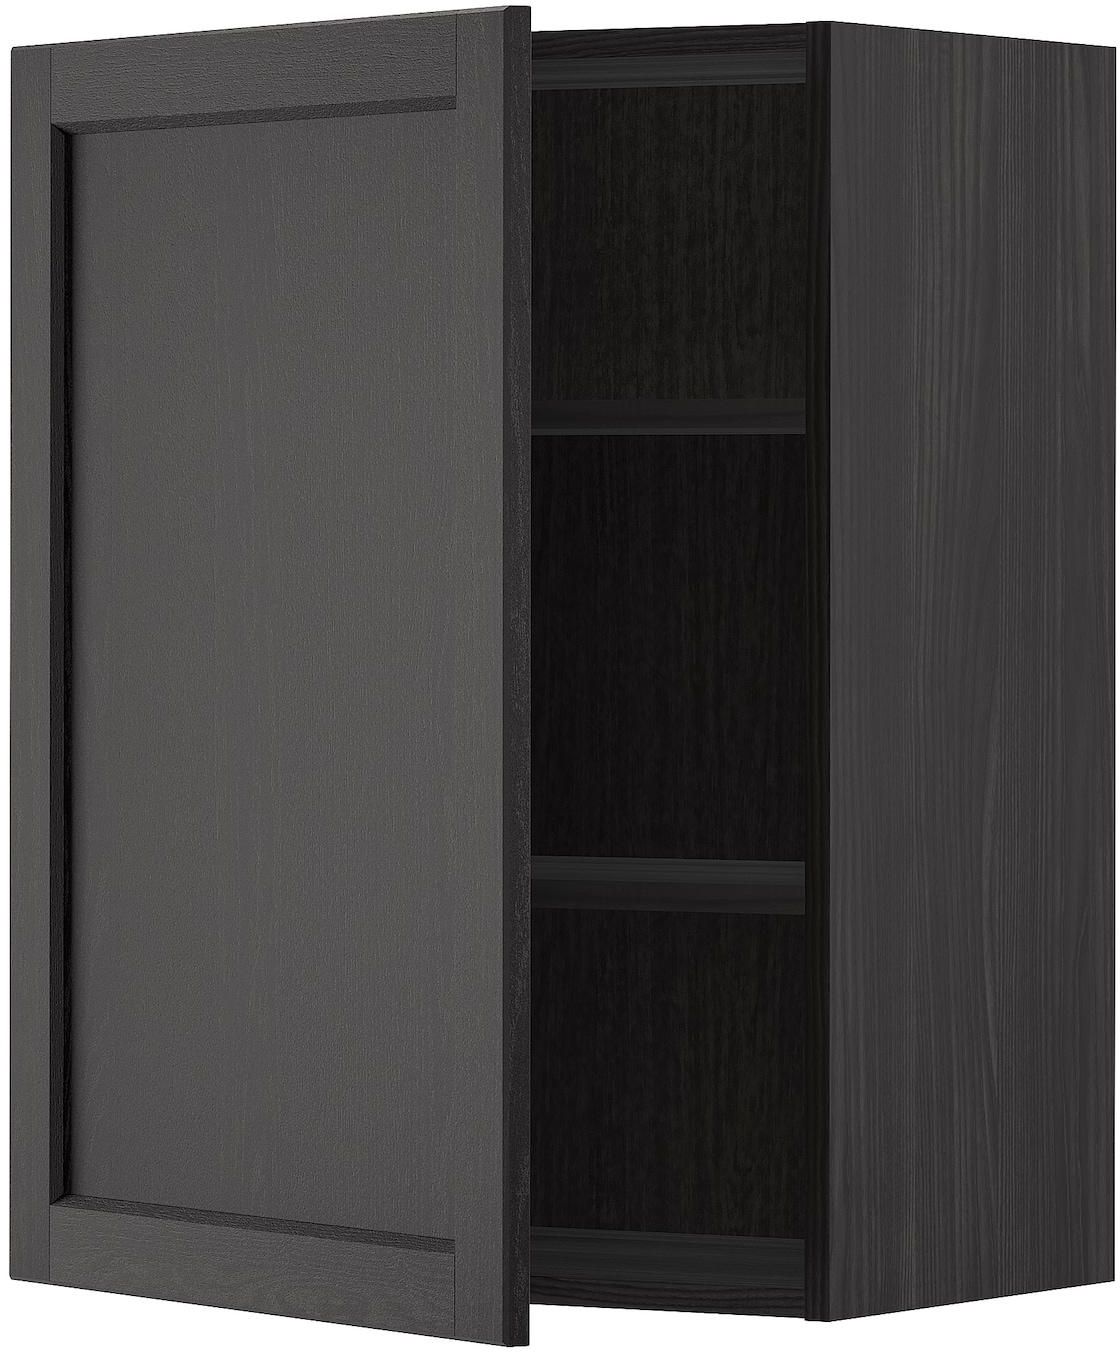 METOD Wall cabinet with shelves - black/Lerhyttan black stained 60x80 cm